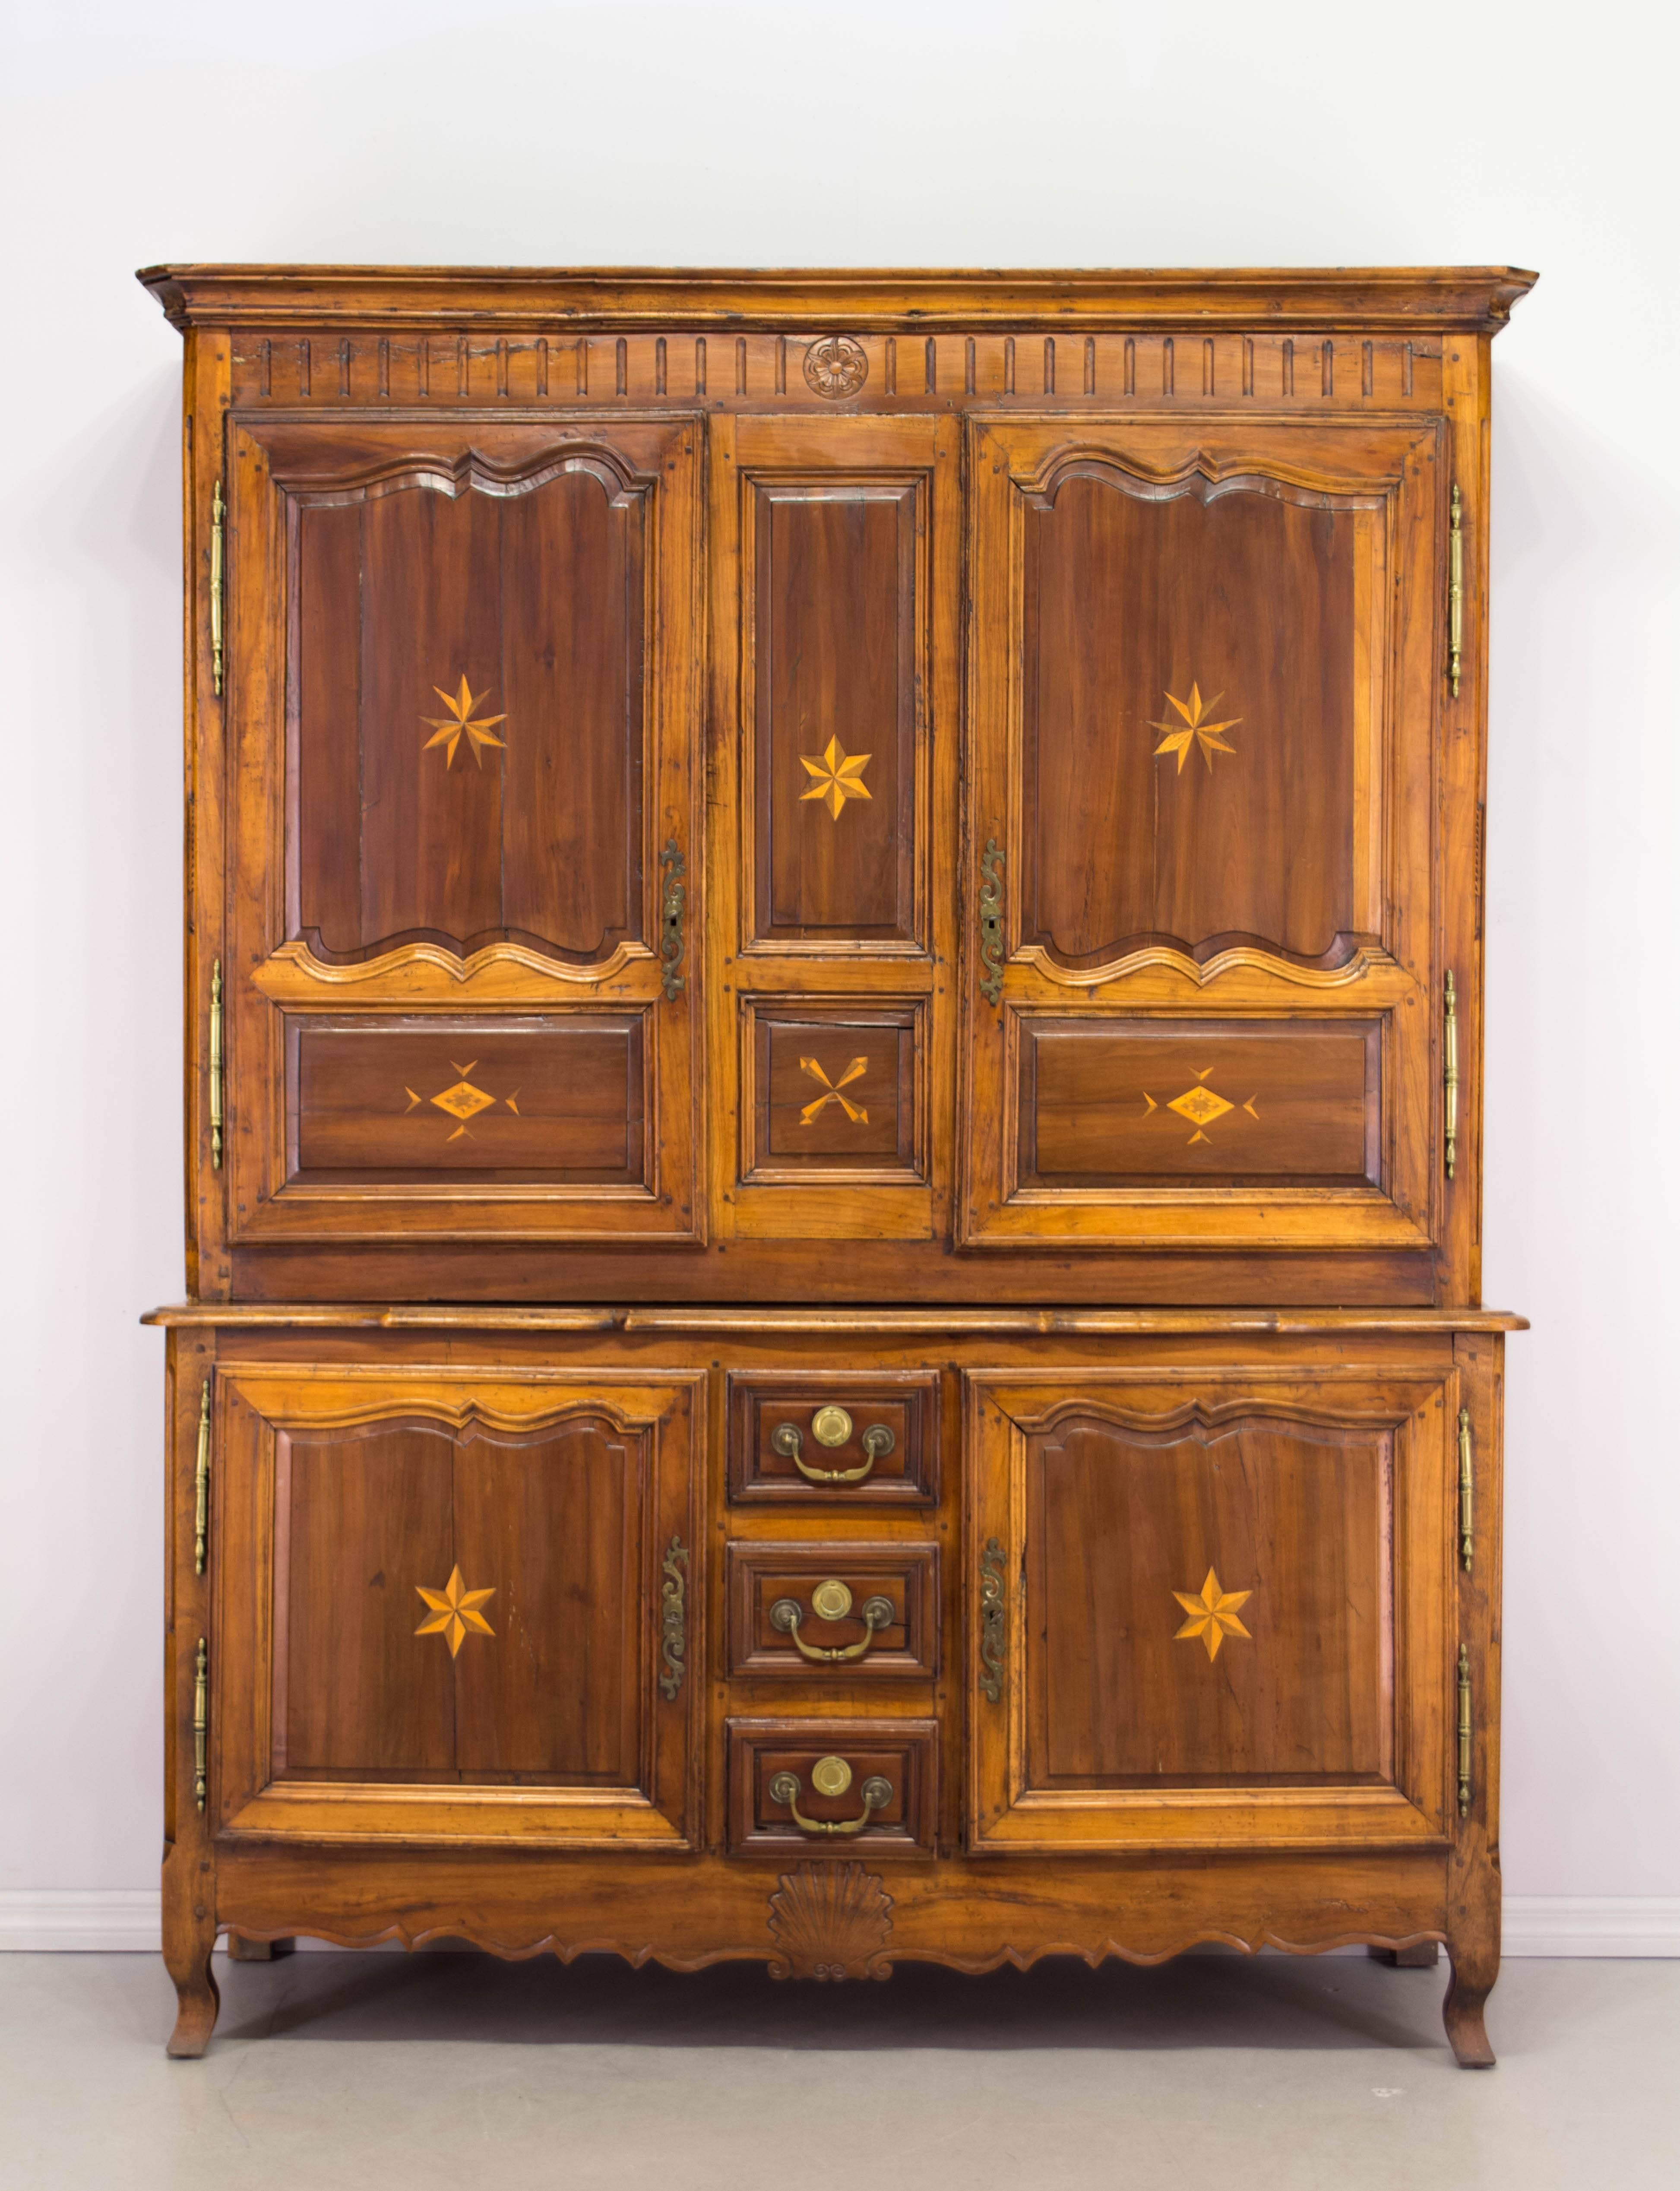 18th century Louis XV buffet à deux corps from the East of France made of cherry and walnut with carved panels. Nicely decorated with inlaid stars and pinwheels. Ample storage, with adjustable shelves. Interior retains some old fabric lining.